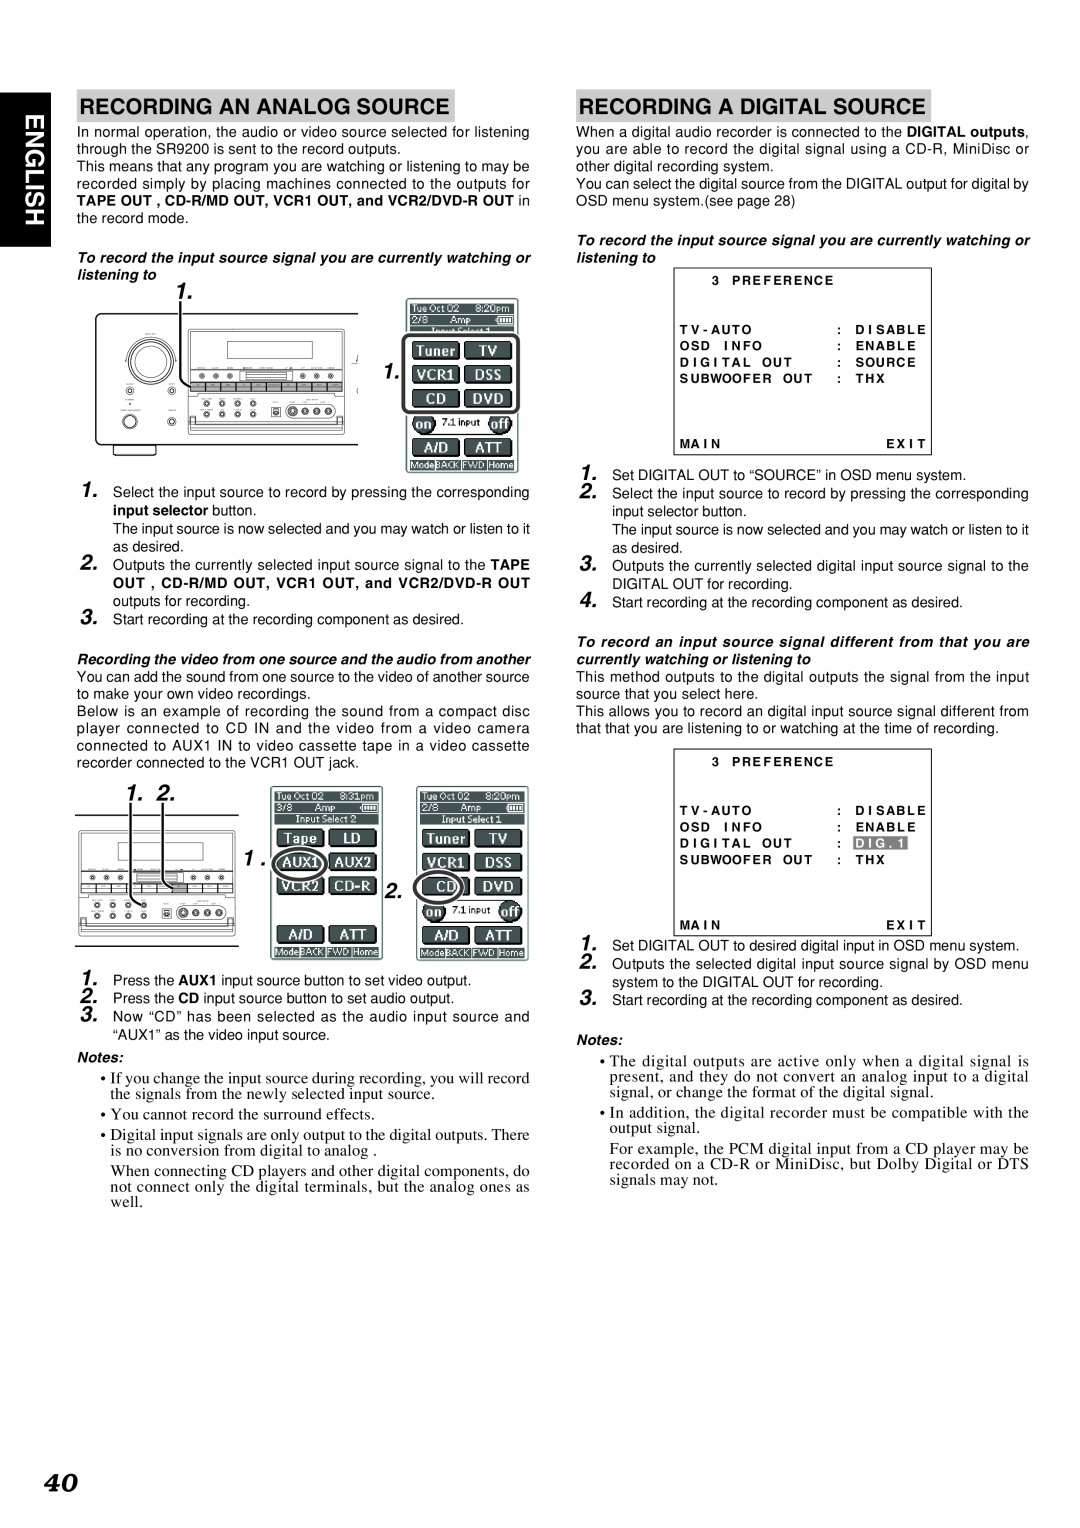 Marantz SR9200 manual Recording An Analog Source, Recording A Digital Source, You cannot record the surround effects 